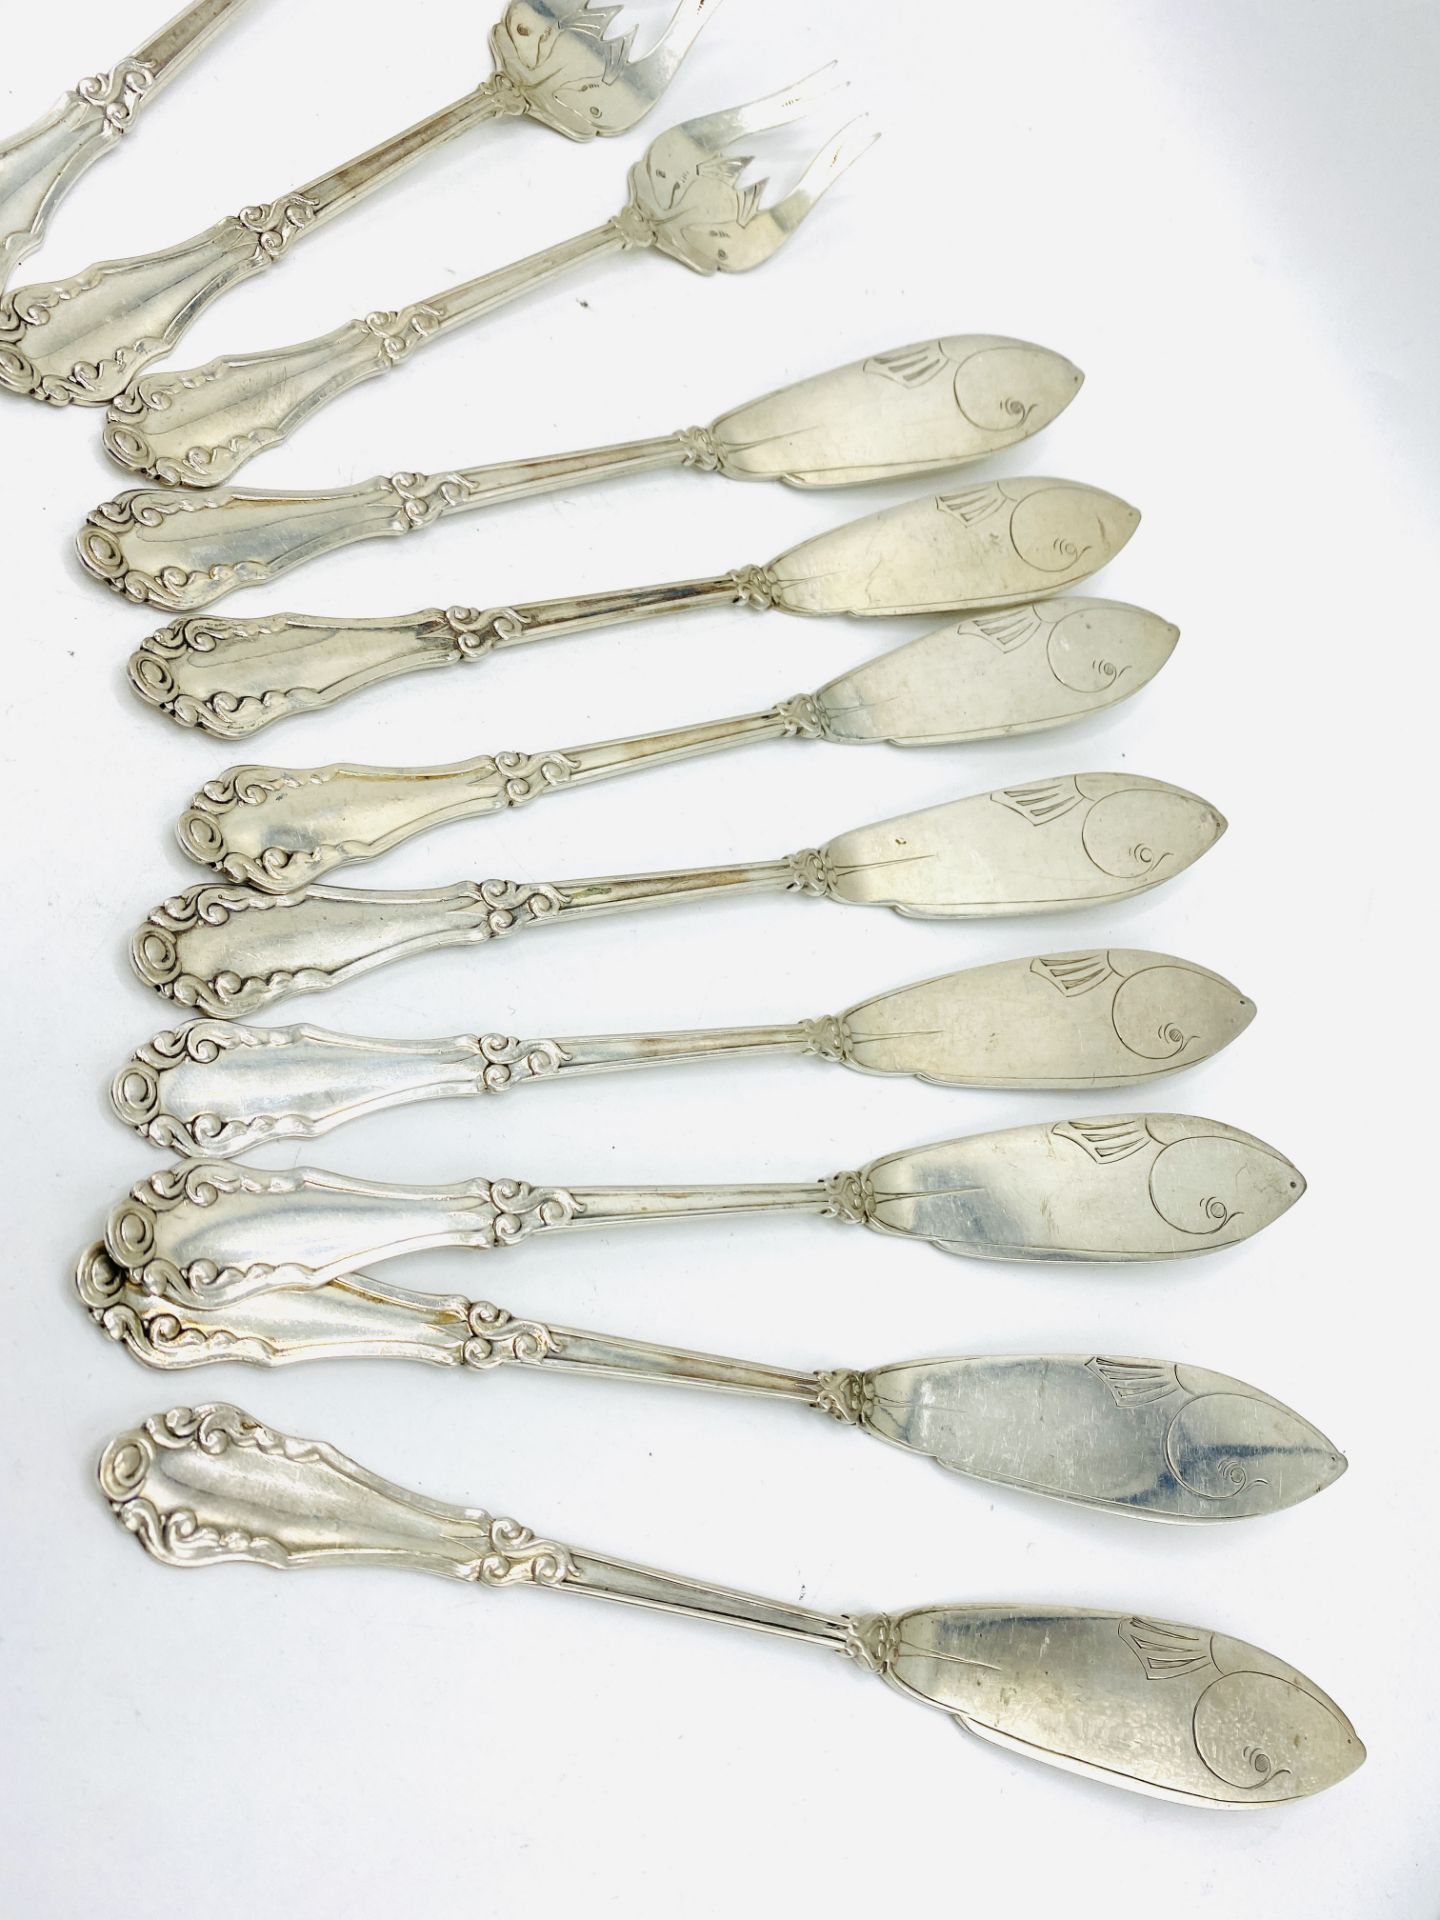 8 piece silver fish cutlery setting by Peter Hertz Of Denmark - Image 3 of 6